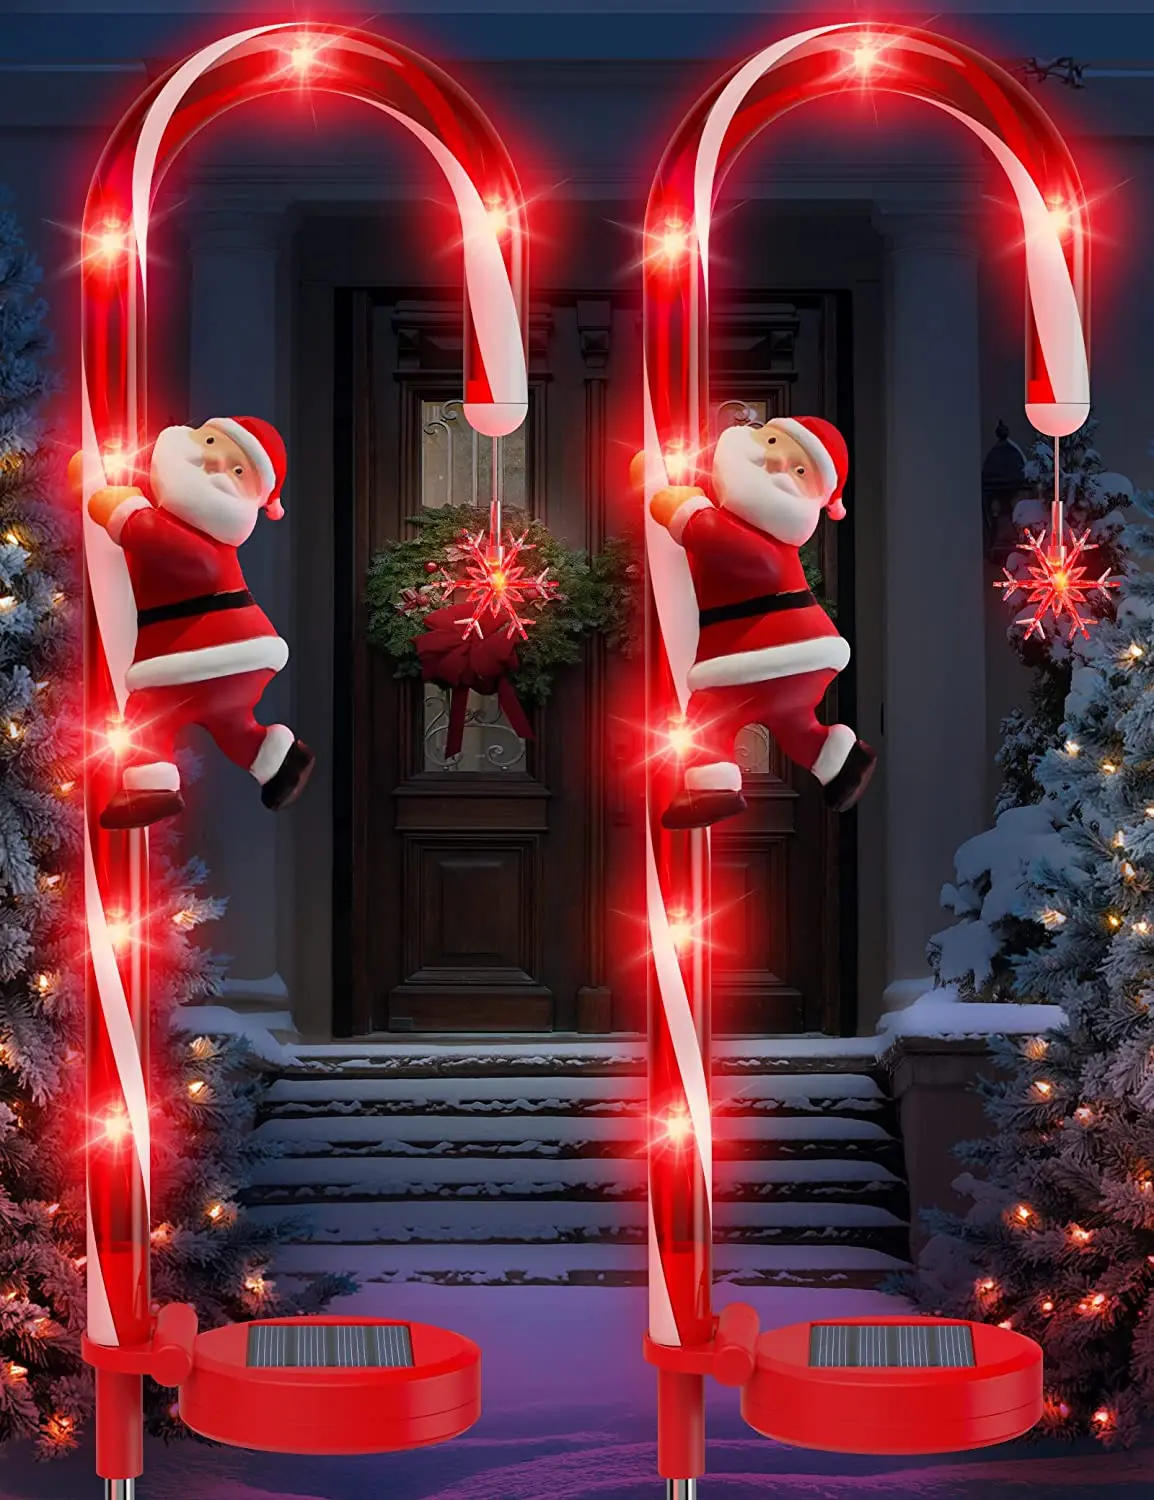 Christmas LED Solar Christmas Decoration Candy Cane Sign Lights Outdoor Stake Lights For Road Garden Lawn Lights Christmas Gifts solar powered speed radar meter sample speed sign to use for traffic road safety